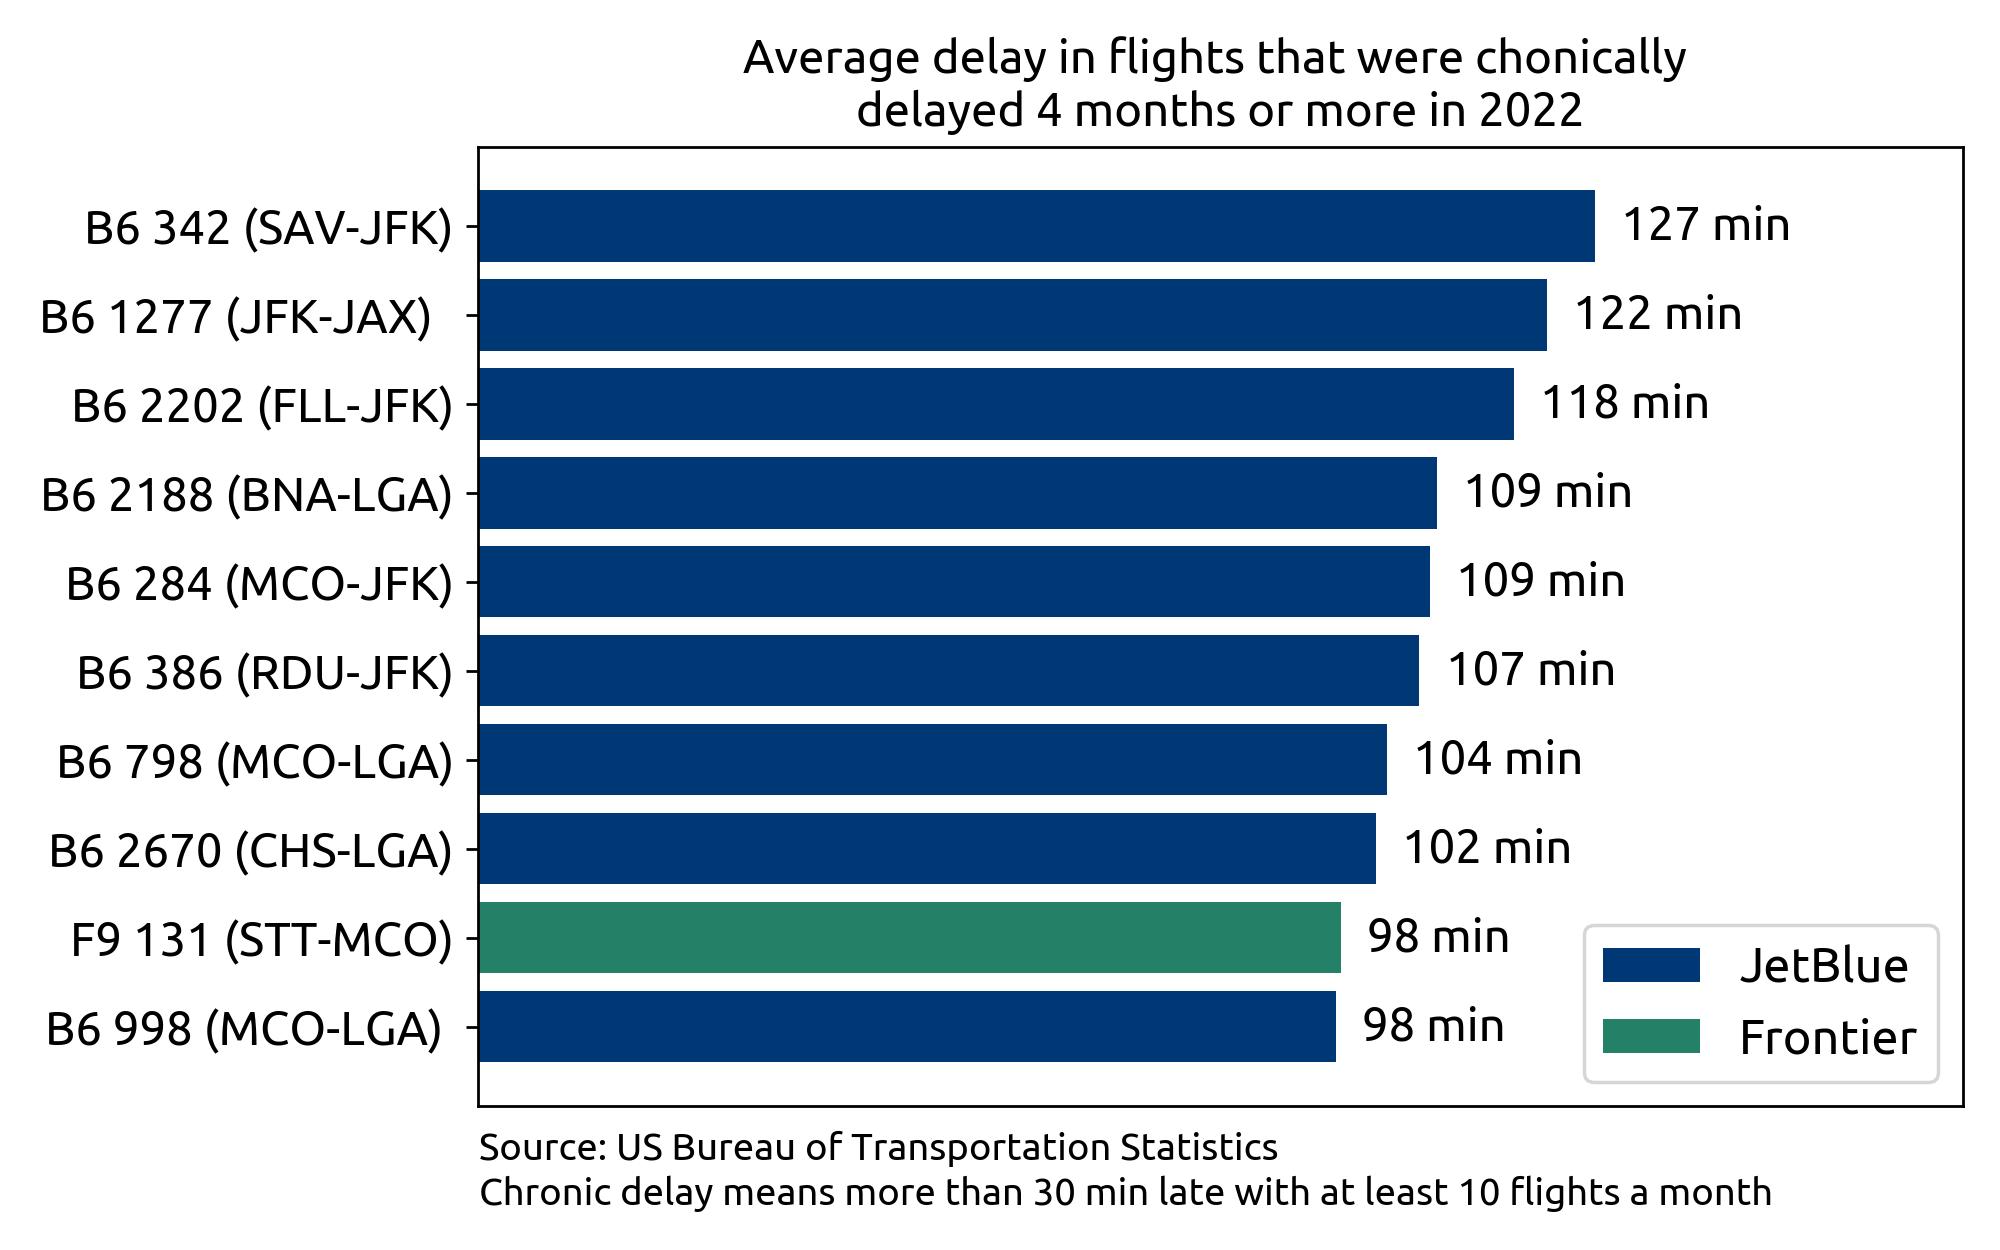 delay time on chronically delayed flights in 2022